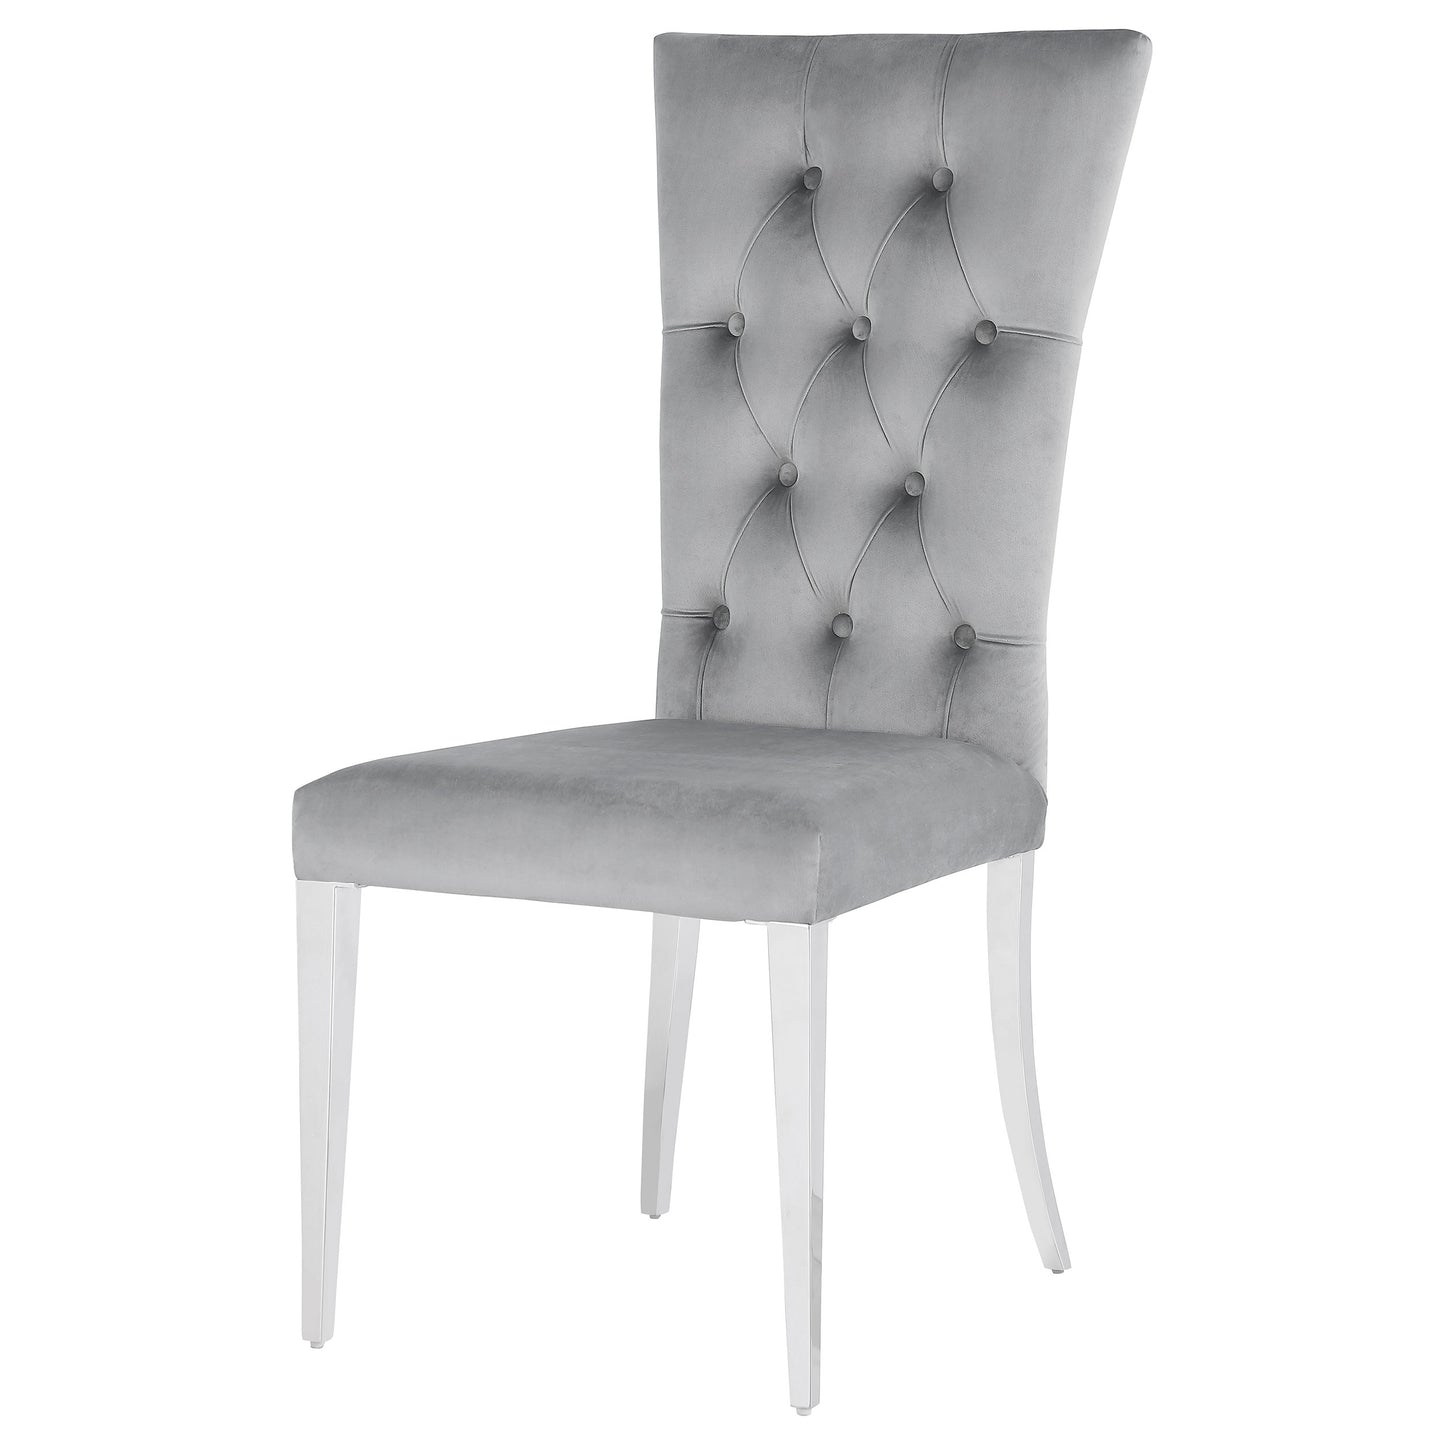 Kerwin Tufted Upholstered Side Chair (Set of 2) Grey and Chrome